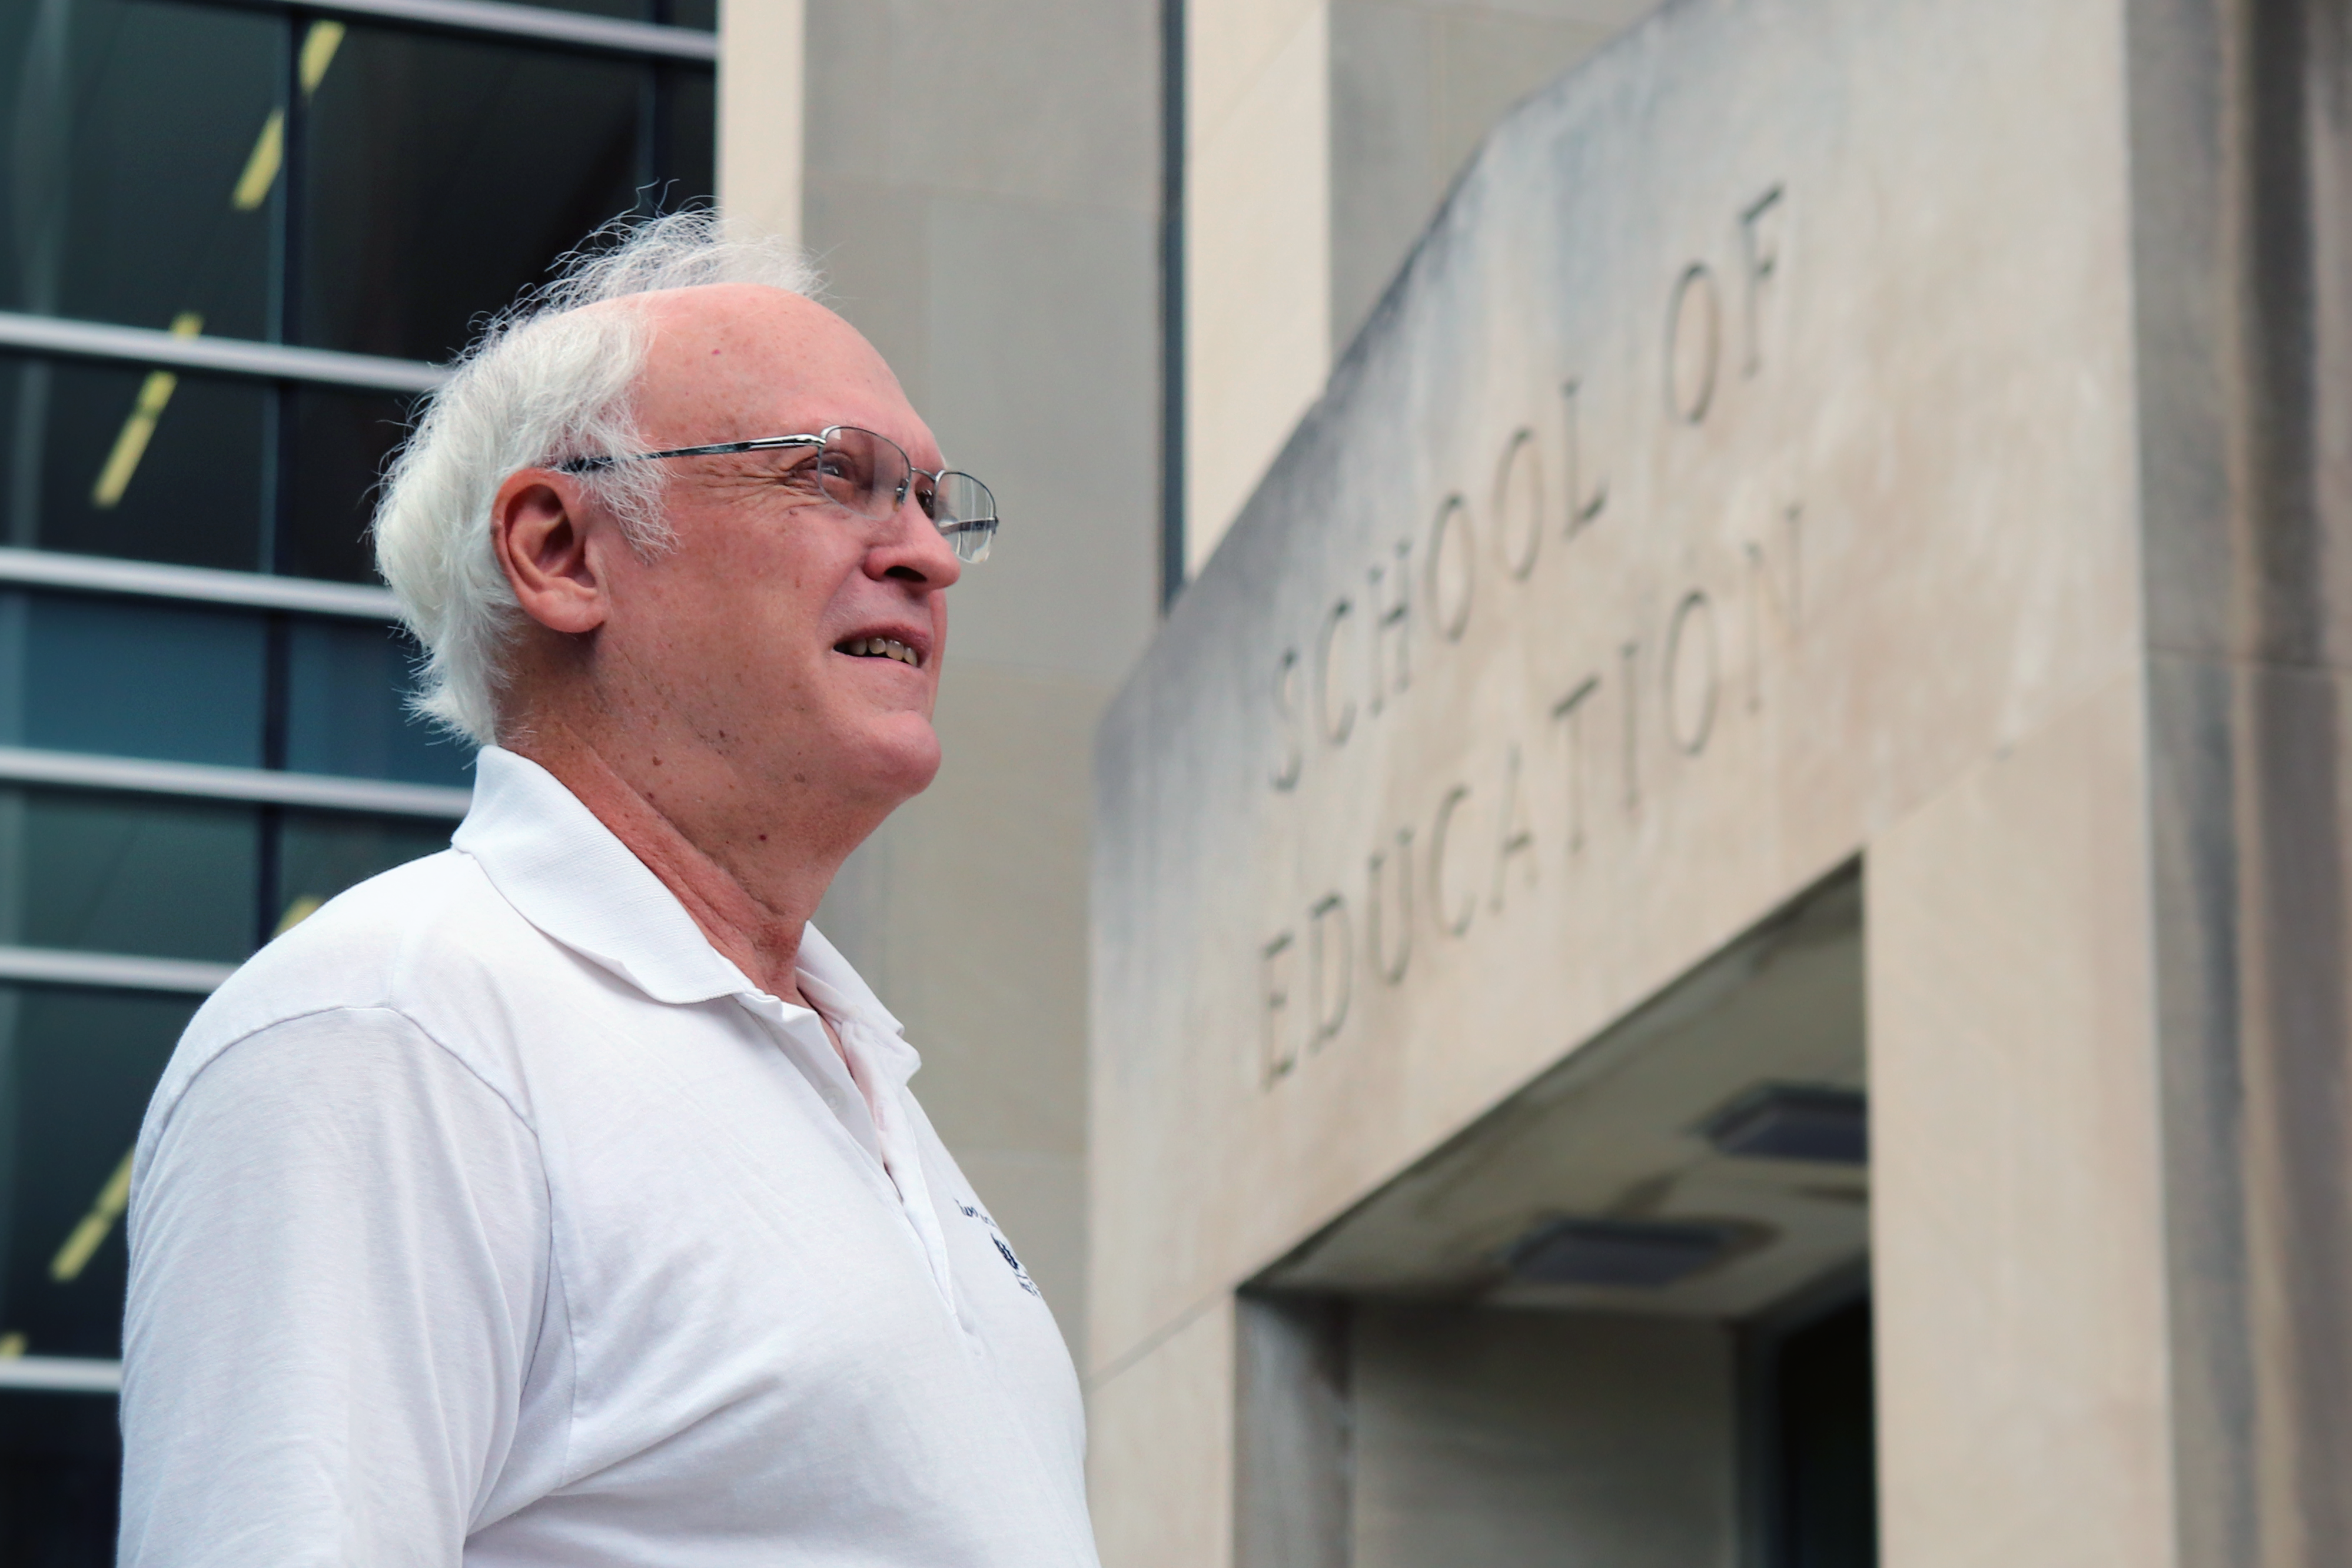 Dr. Michael F. Young stands outside the Gentry building